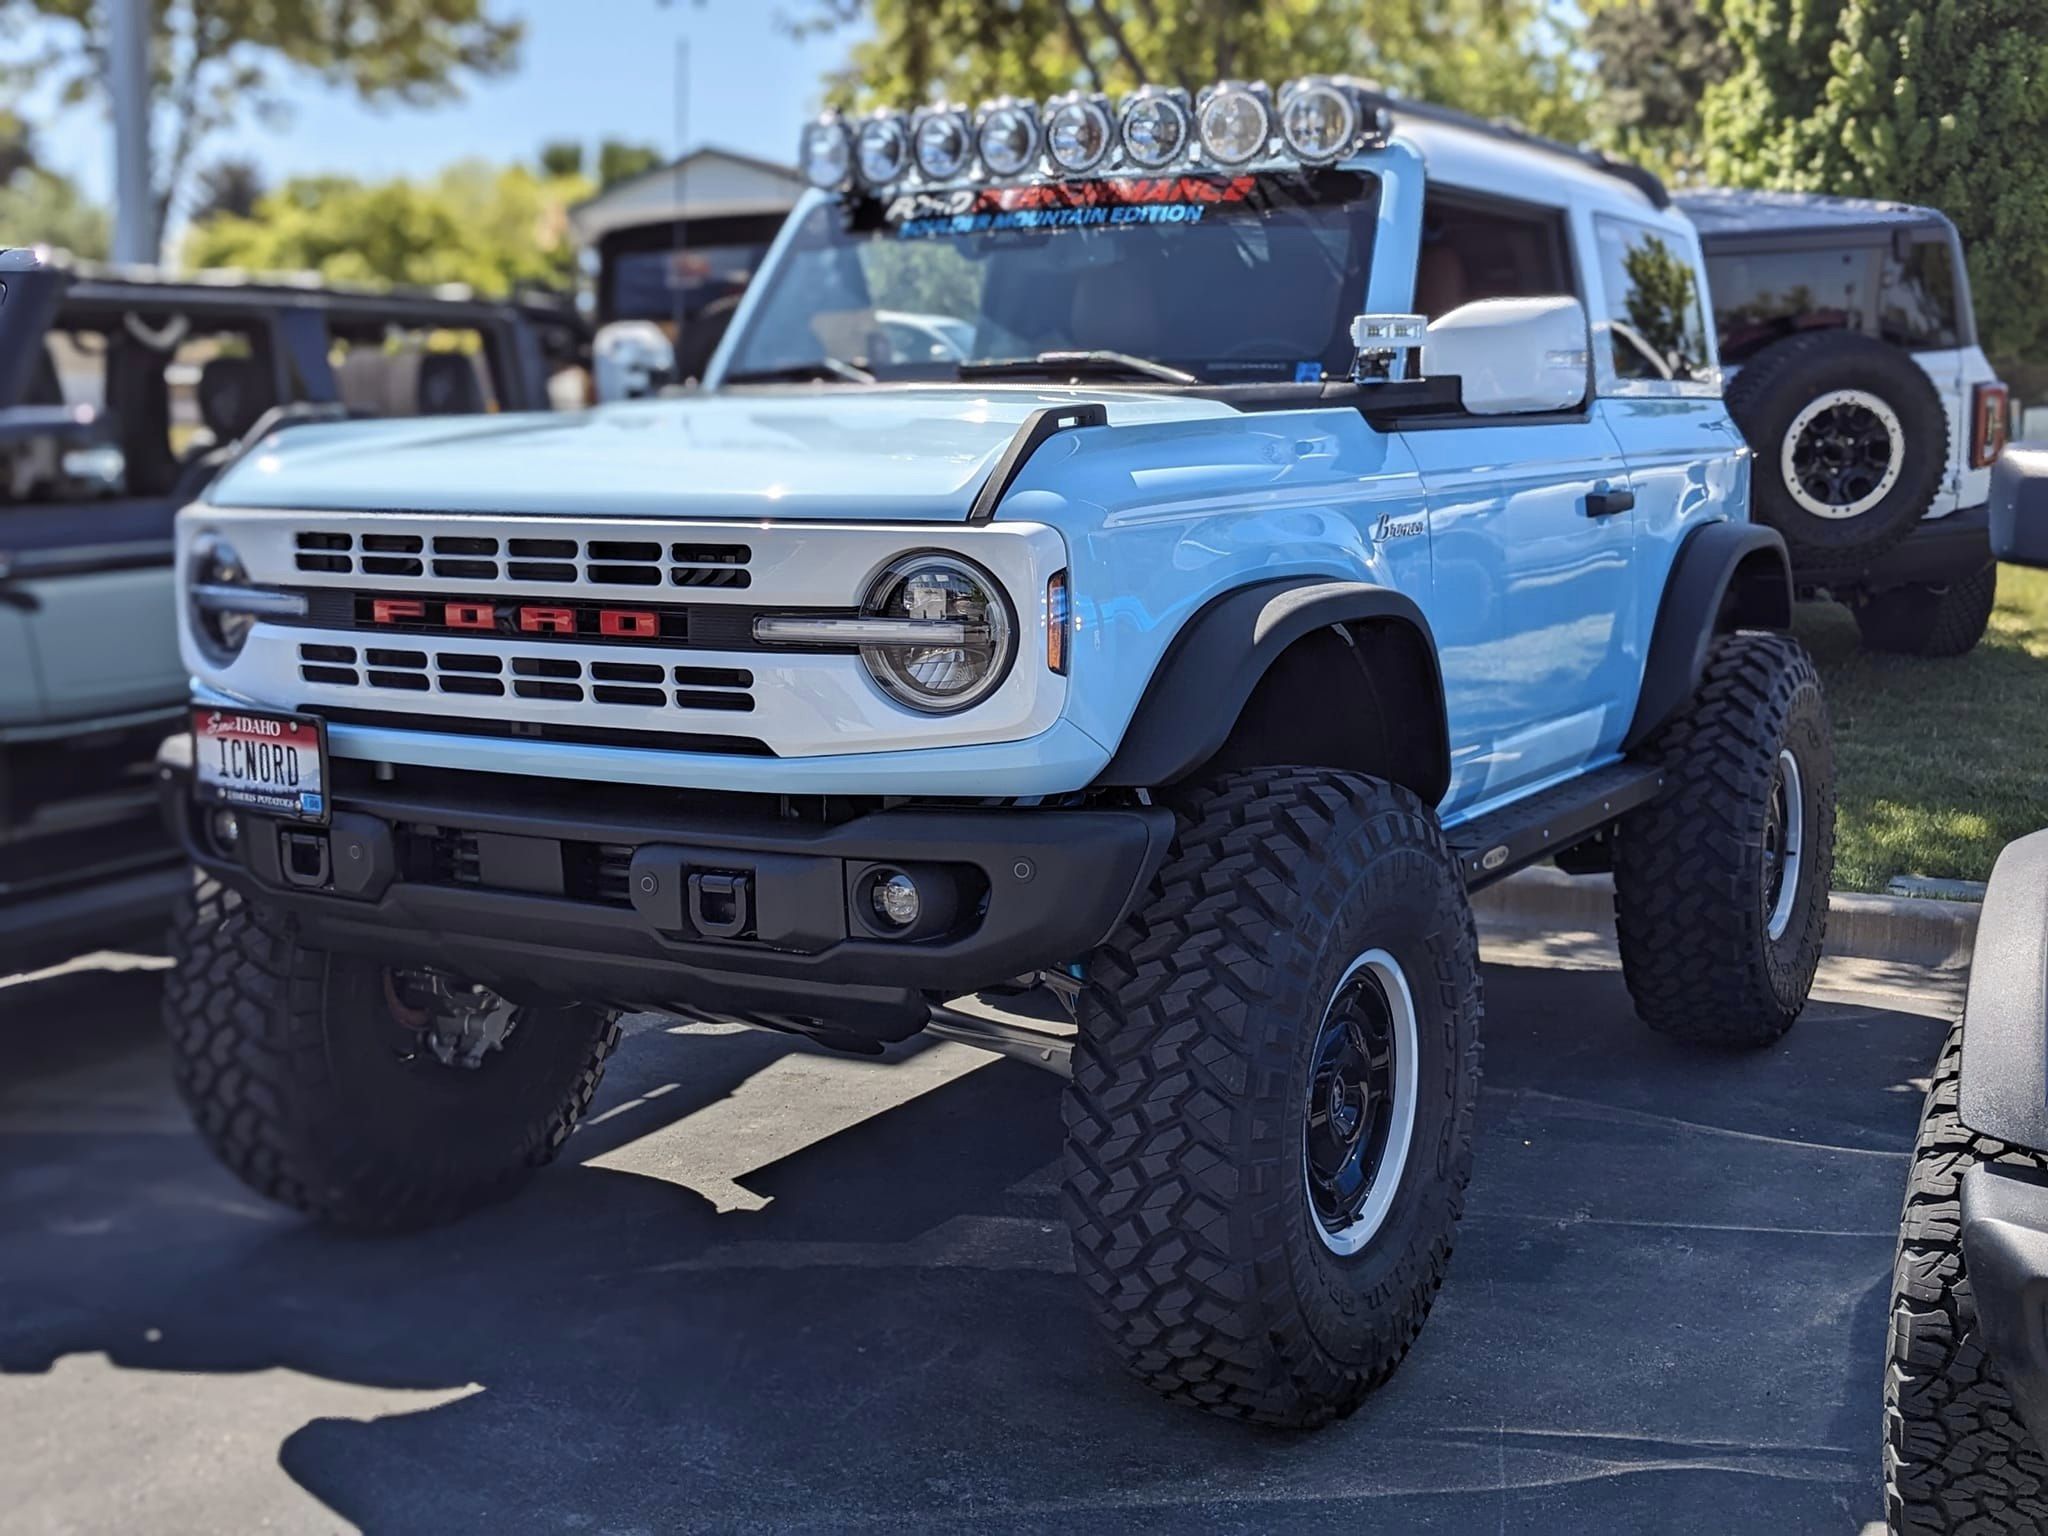 Ford Bronco HERITAGE EDITION Bronco Club cars and coffee